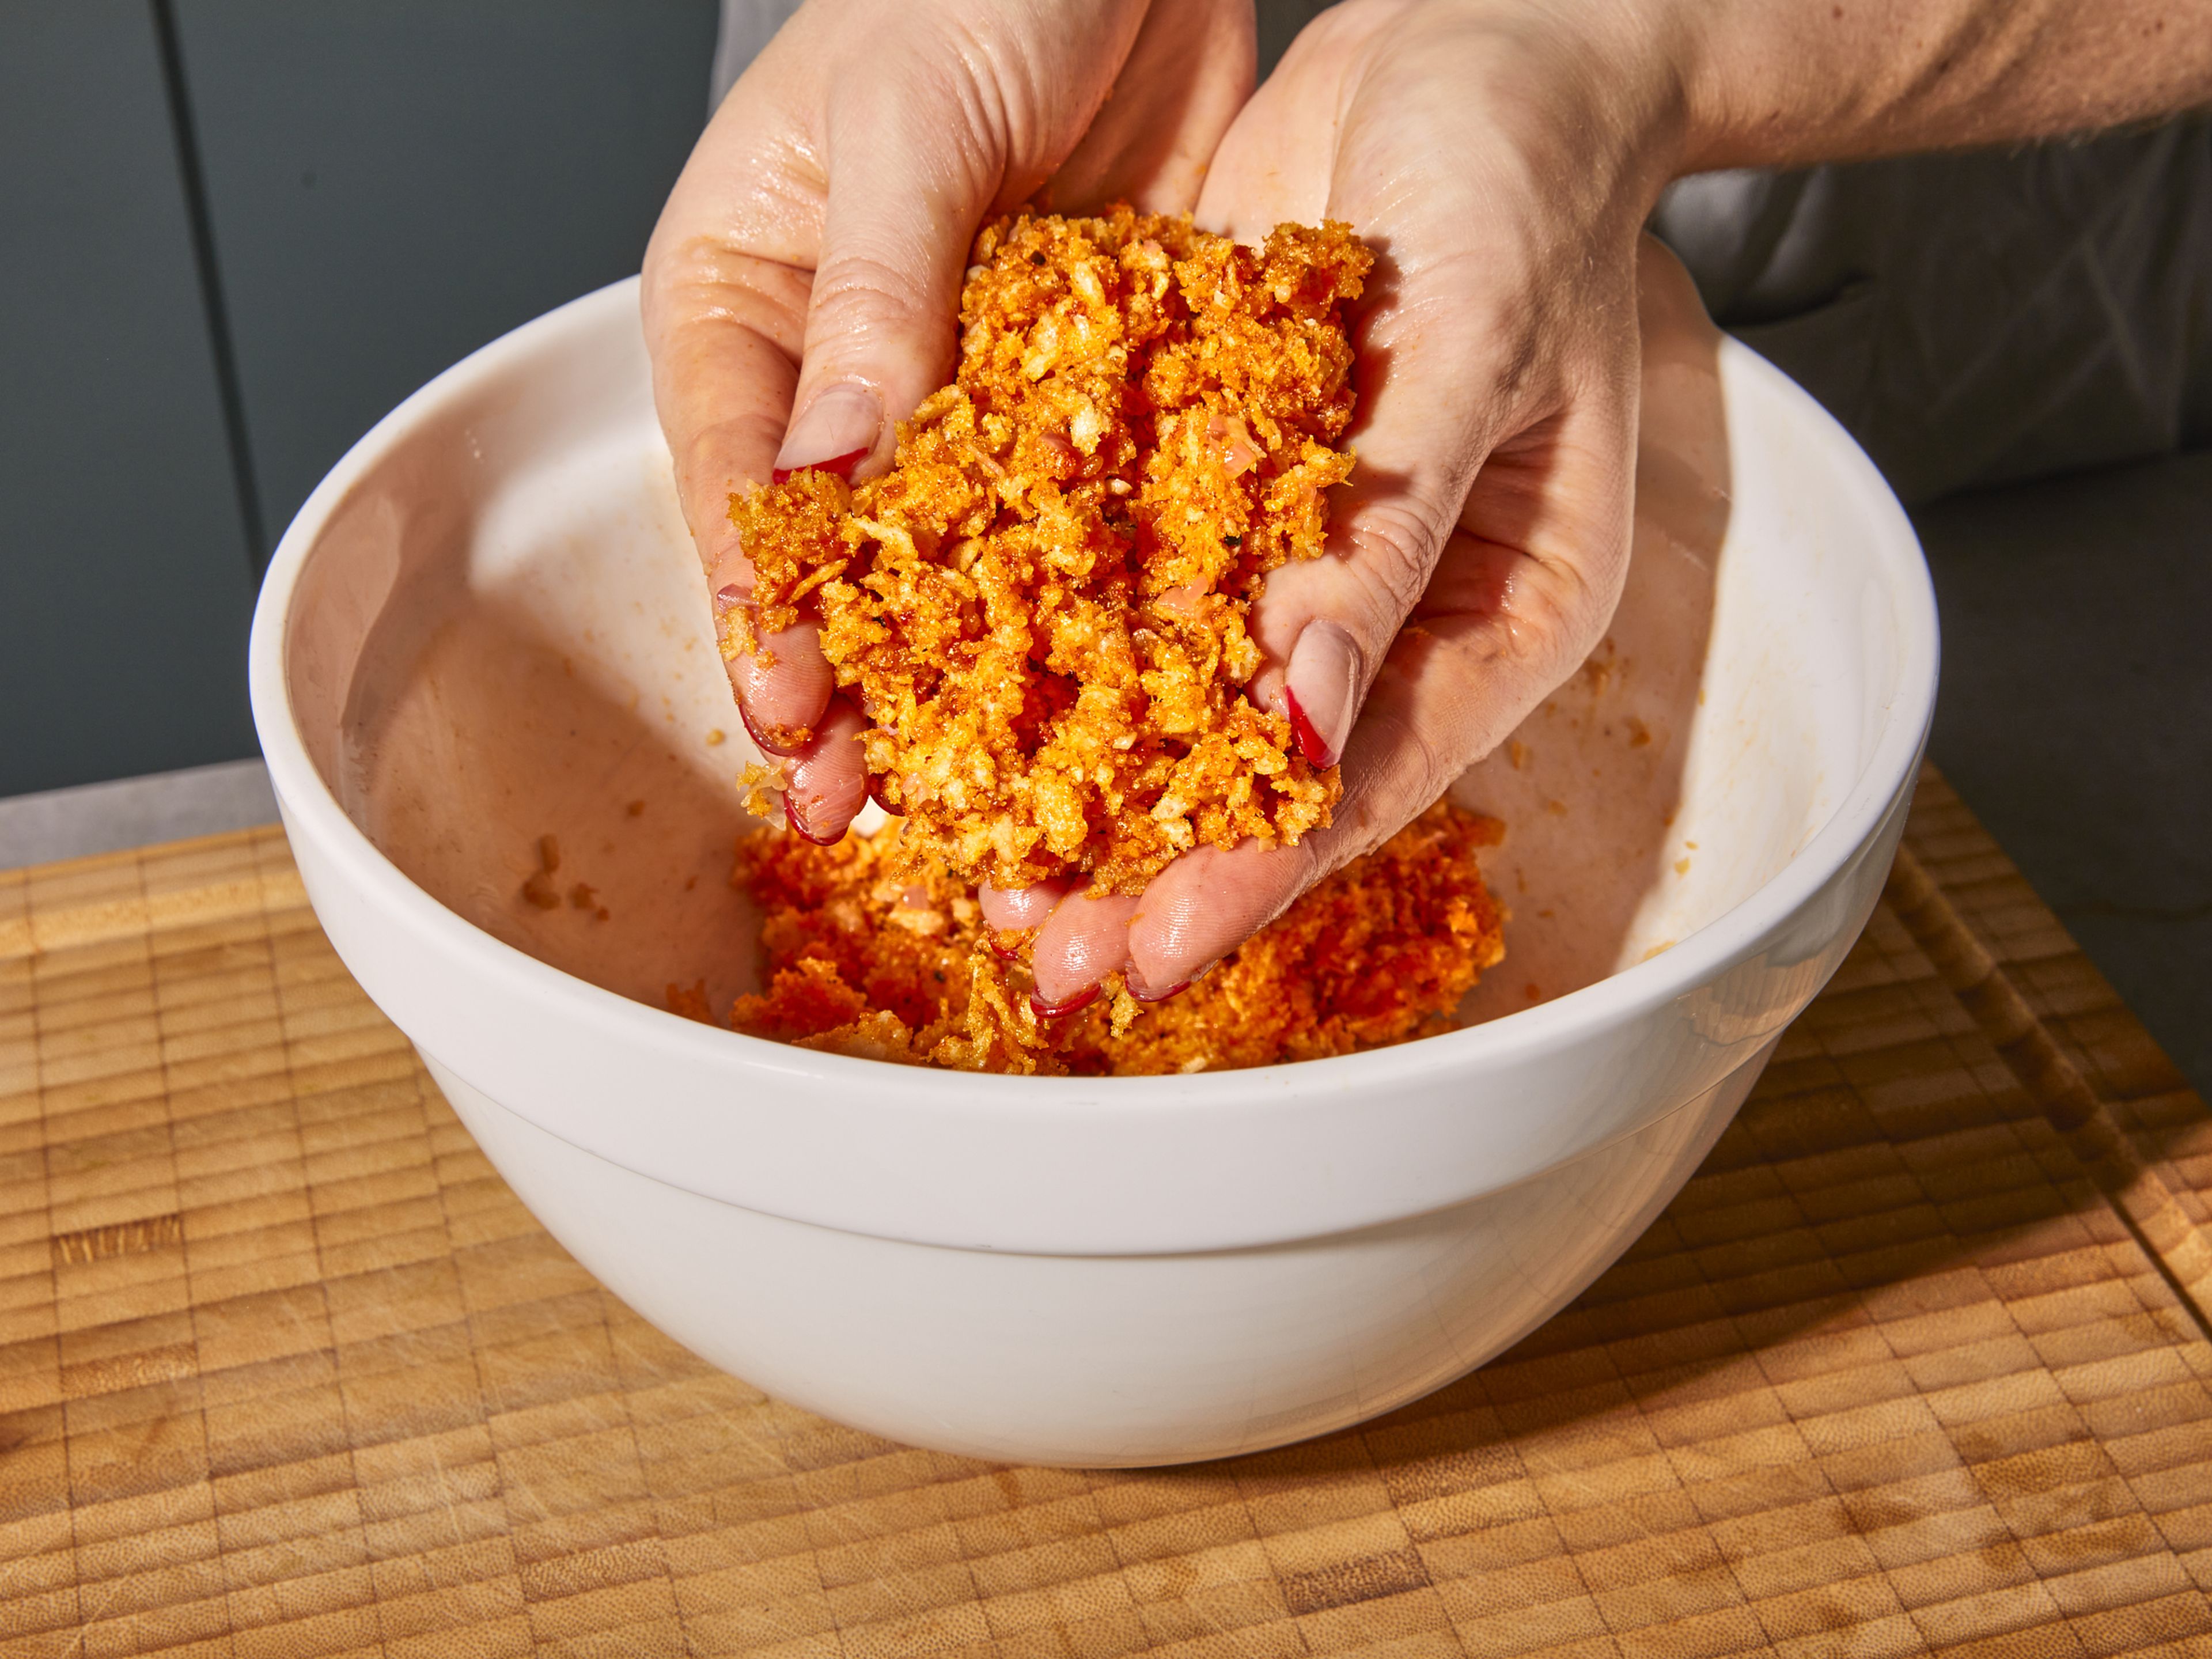 Turn off the heat and add butter and wine sauce to panko breadcrumbs, lemon zest, paprika, garlic powder, and beaten egg, combining well to evenly mix the breadcrumbs, egg and aromatics. Use your hands to gently scrunch the breadcrumbs to form a chunky but moist mixture.